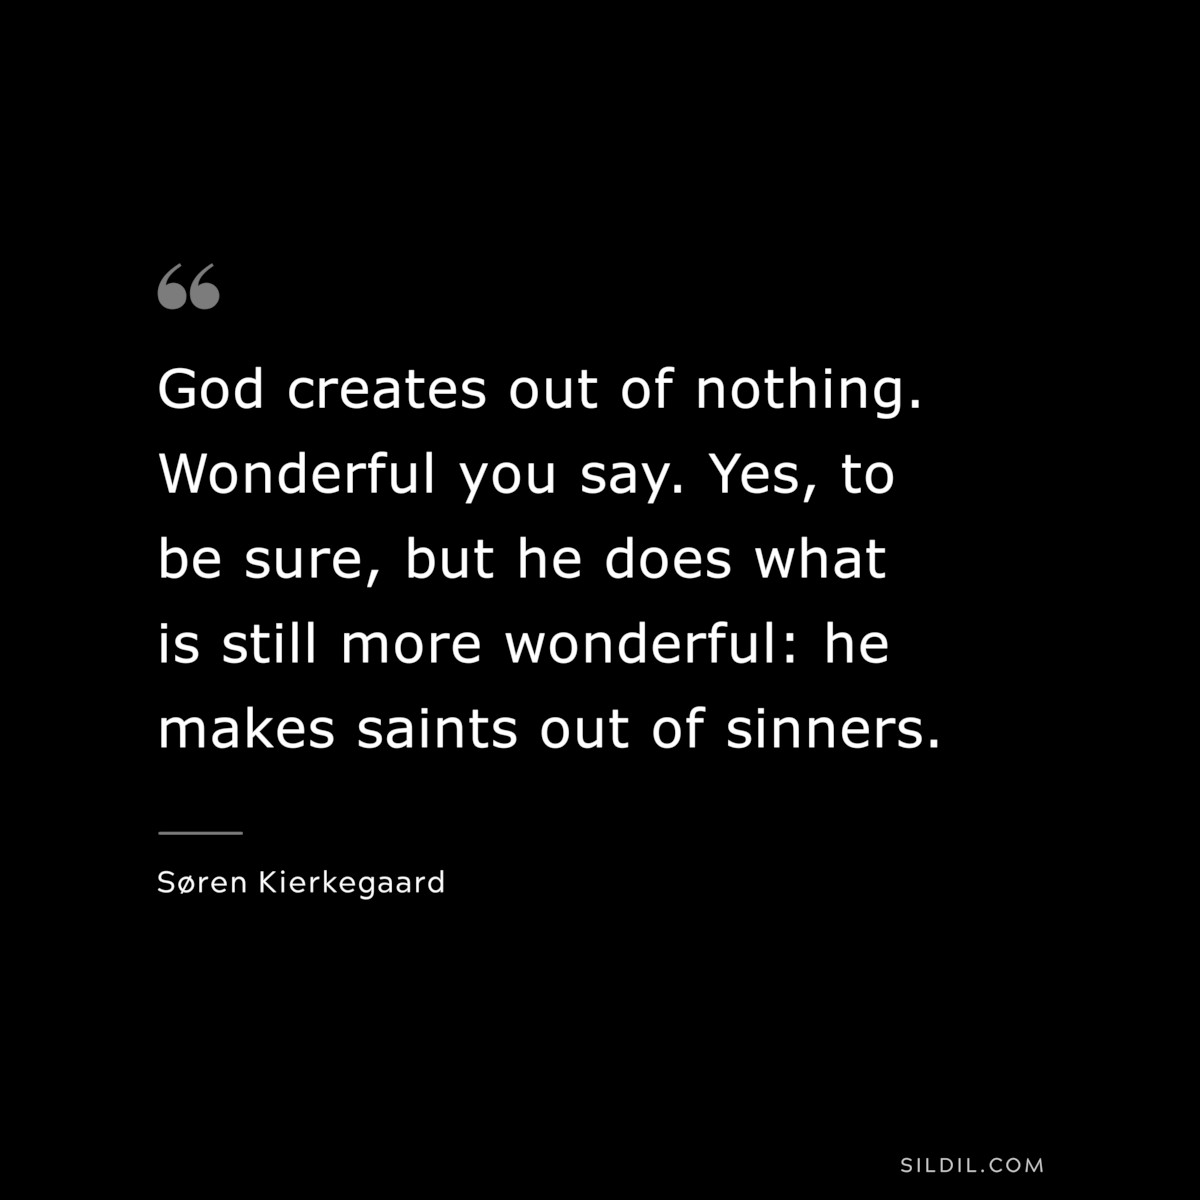 God creates out of nothing. Wonderful you say. Yes, to be sure, but he does what is still more wonderful: he makes saints out of sinners. ― Søren Kierkegaard